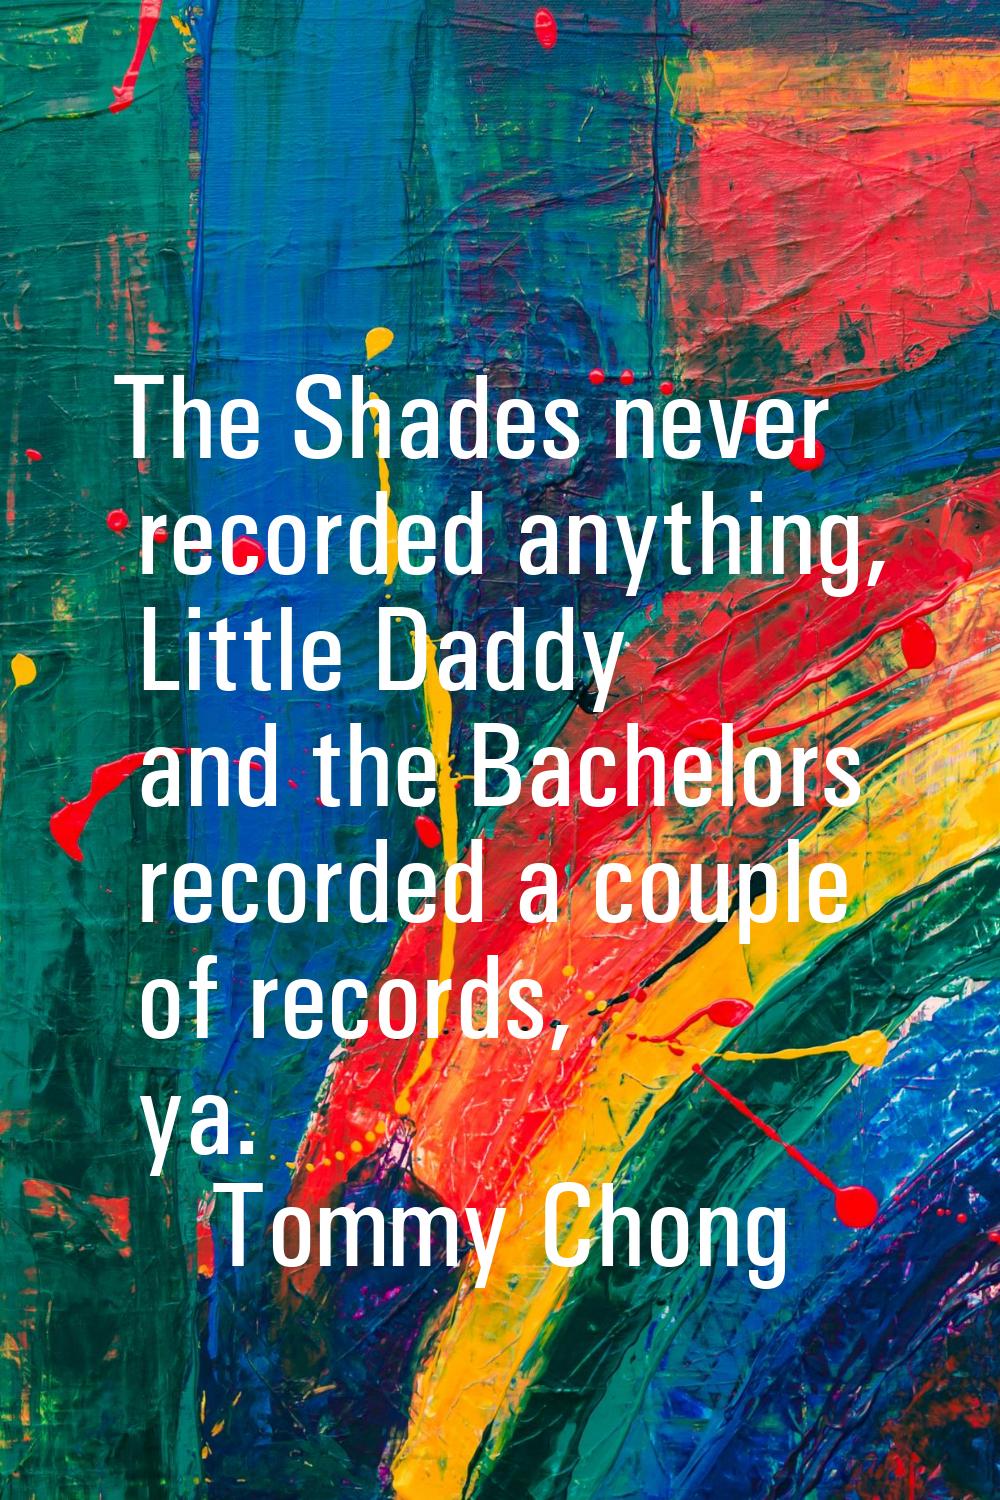 The Shades never recorded anything, Little Daddy and the Bachelors recorded a couple of records, ya